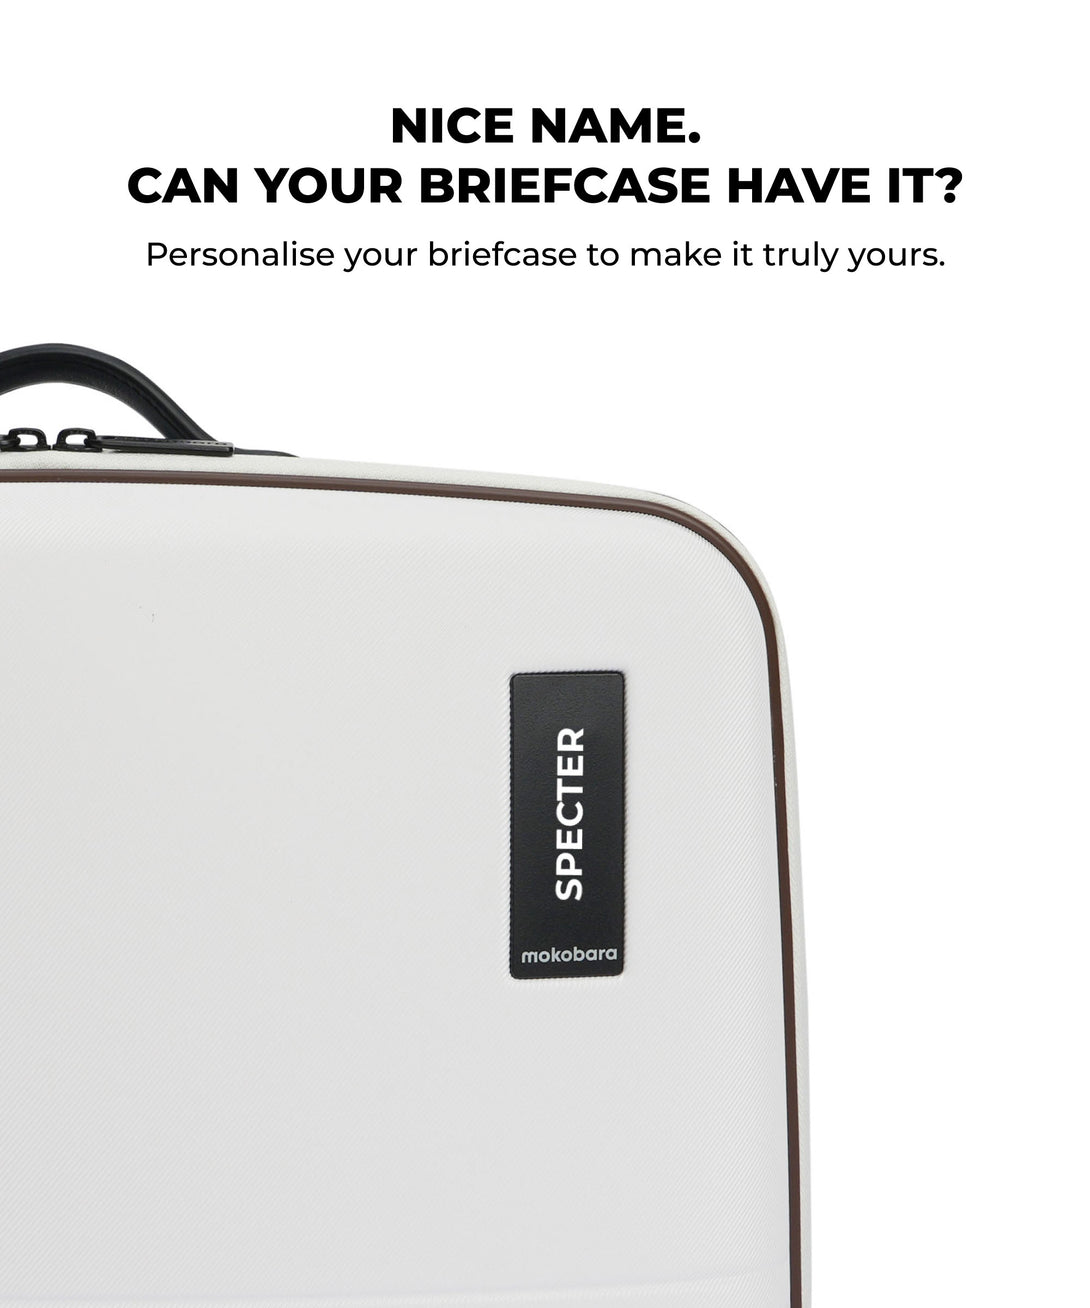 The Hard Shell Briefcase